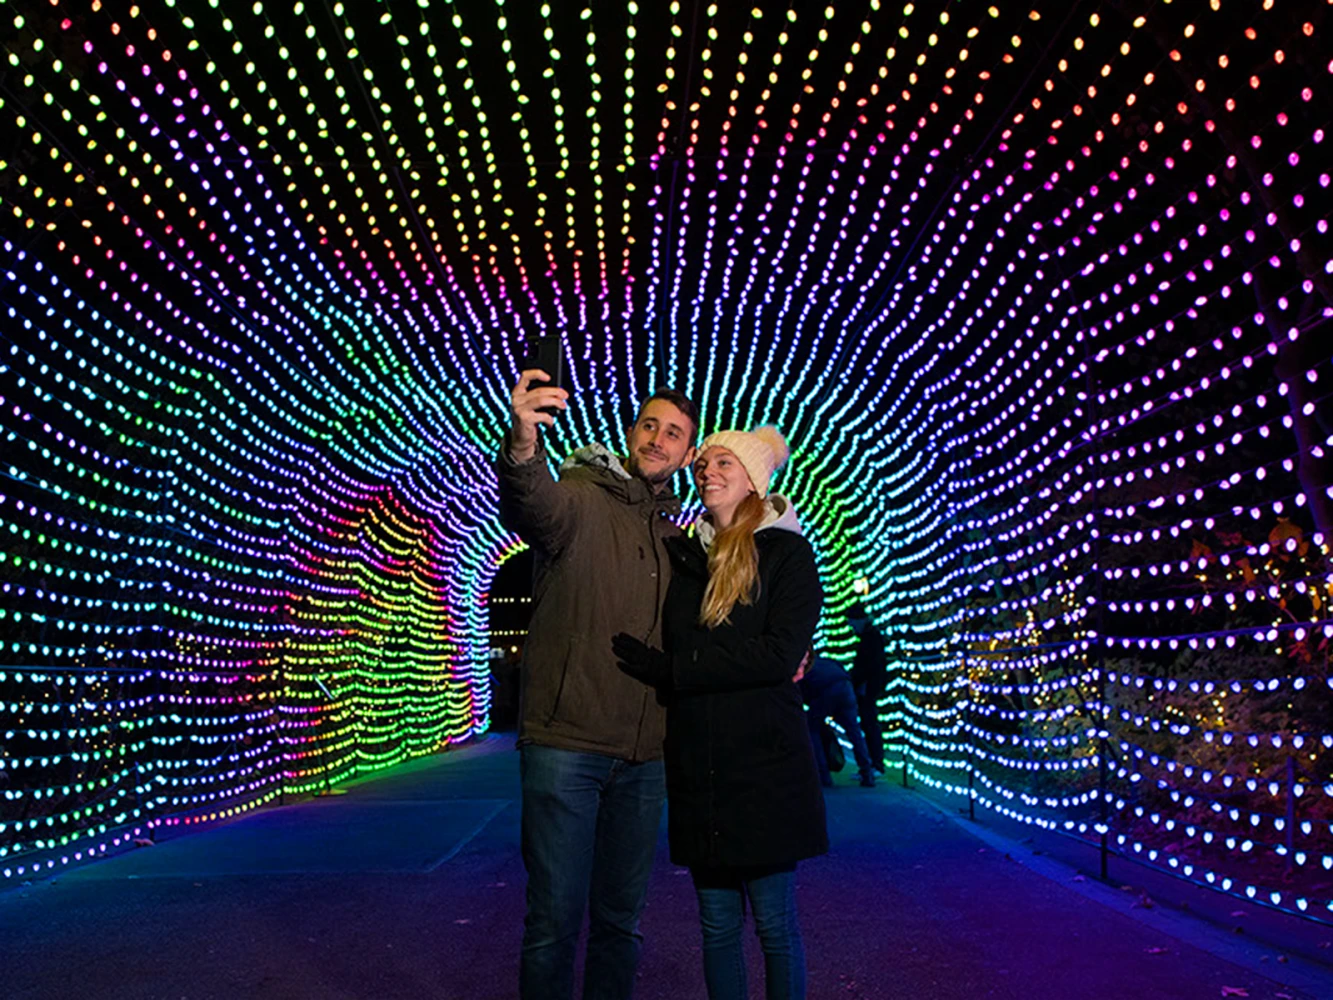 Bronx Zoo Holiday Lights: What to expect - 2